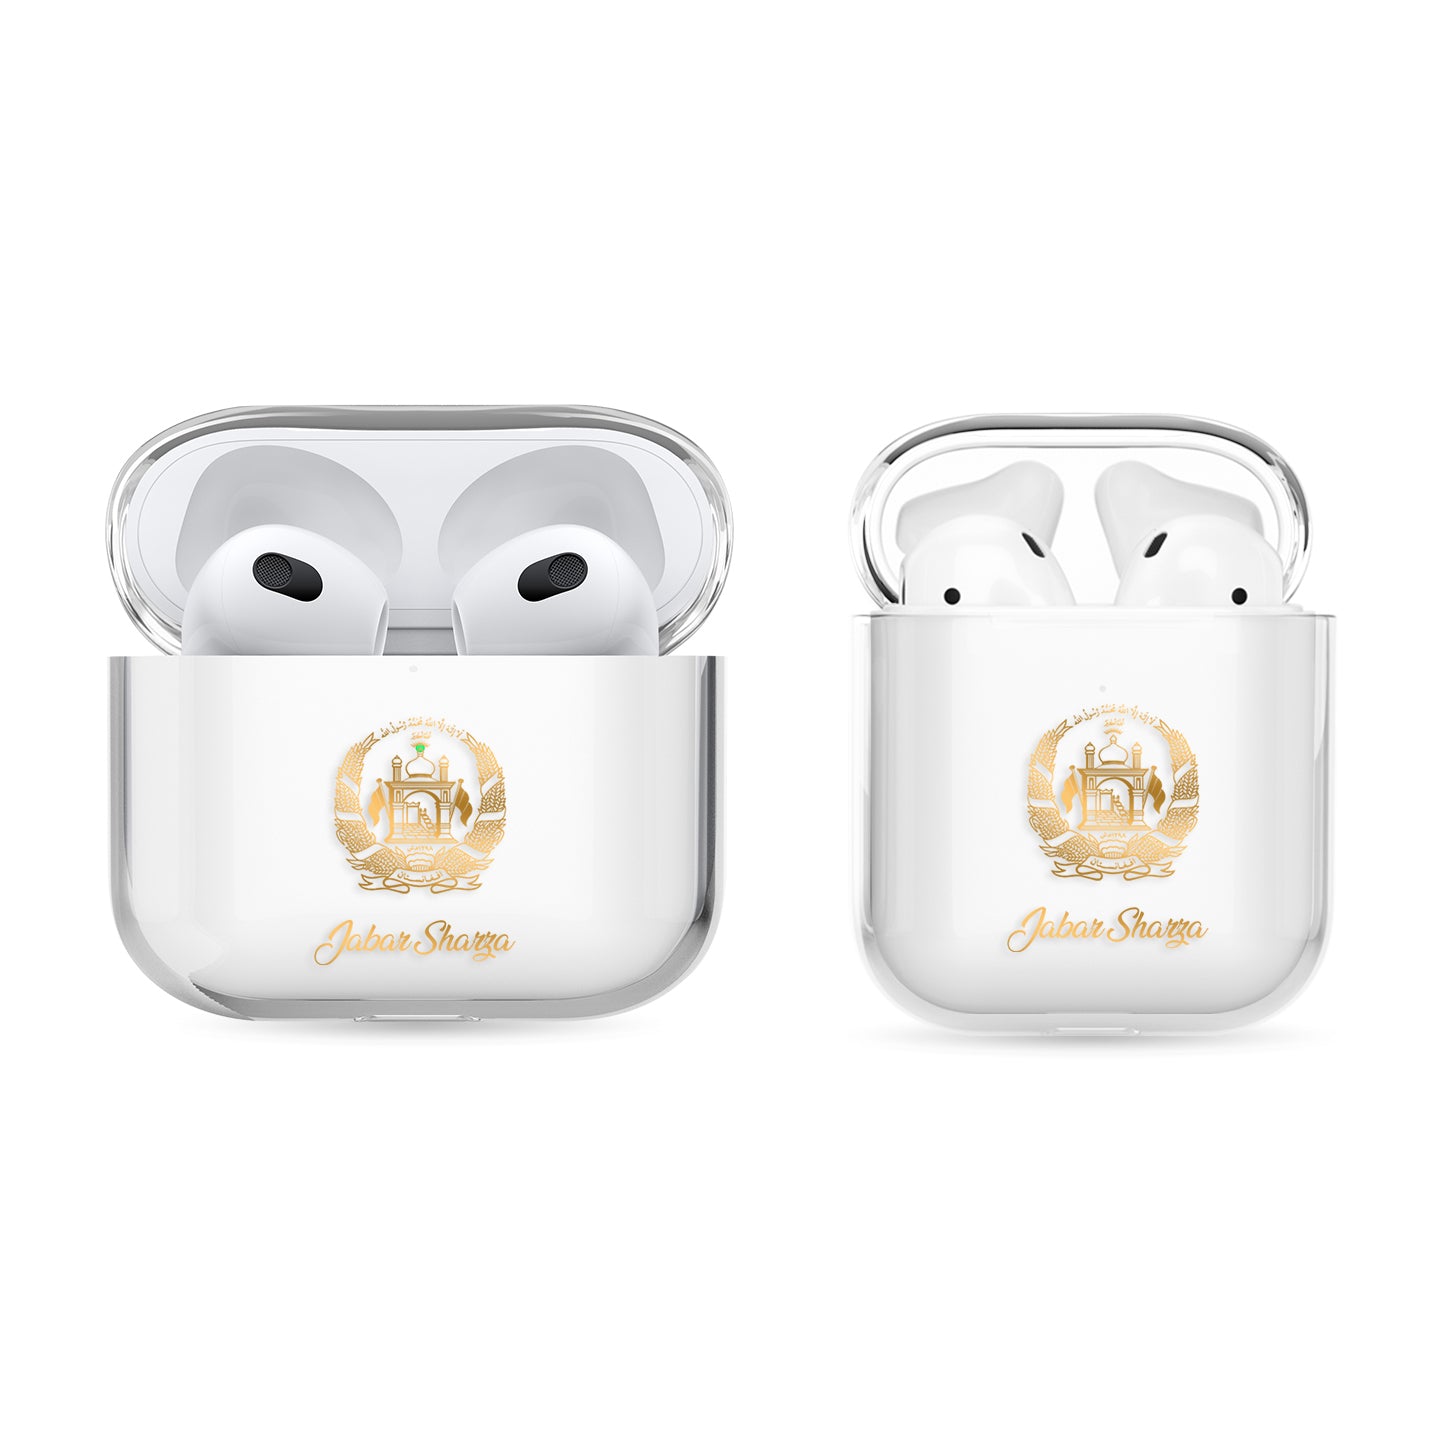 Airpods Hülle - Afghanistan